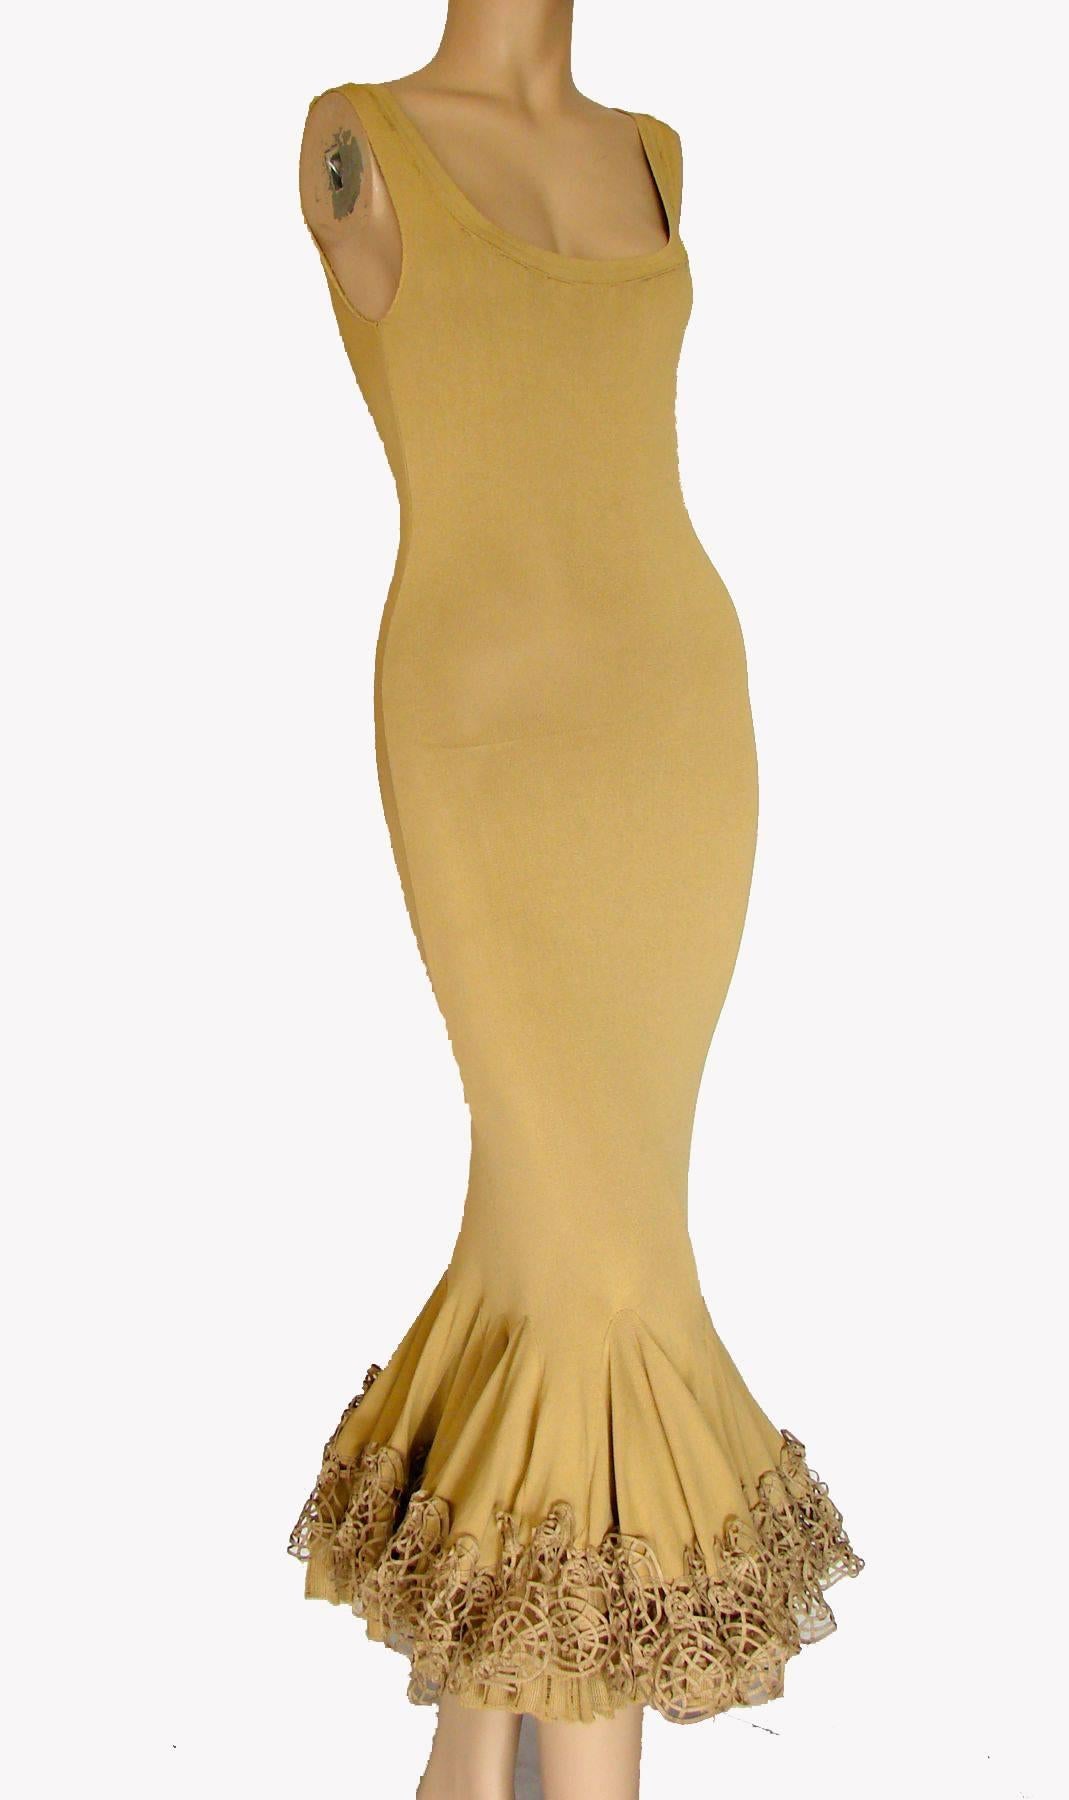 Roberto Cavalli Mermaid Dress Gown with Leather Ruffle Hem 1990s Size S 2